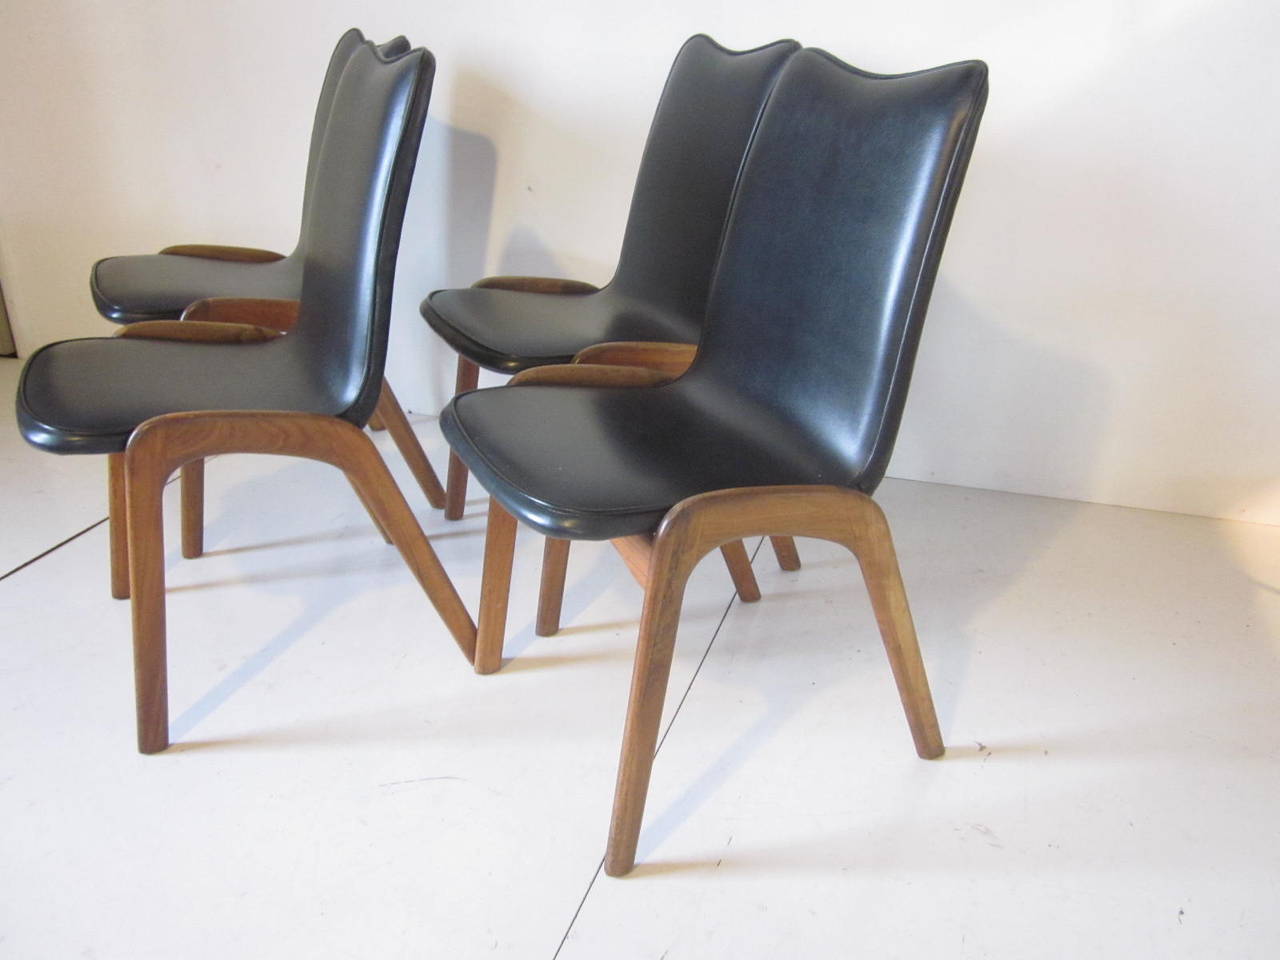 A set of four sculptural solid walnut legged dining chairs with leatherette black upholstery in the manner of designer Adrian Pearsall. A light look but sturdy and well made.